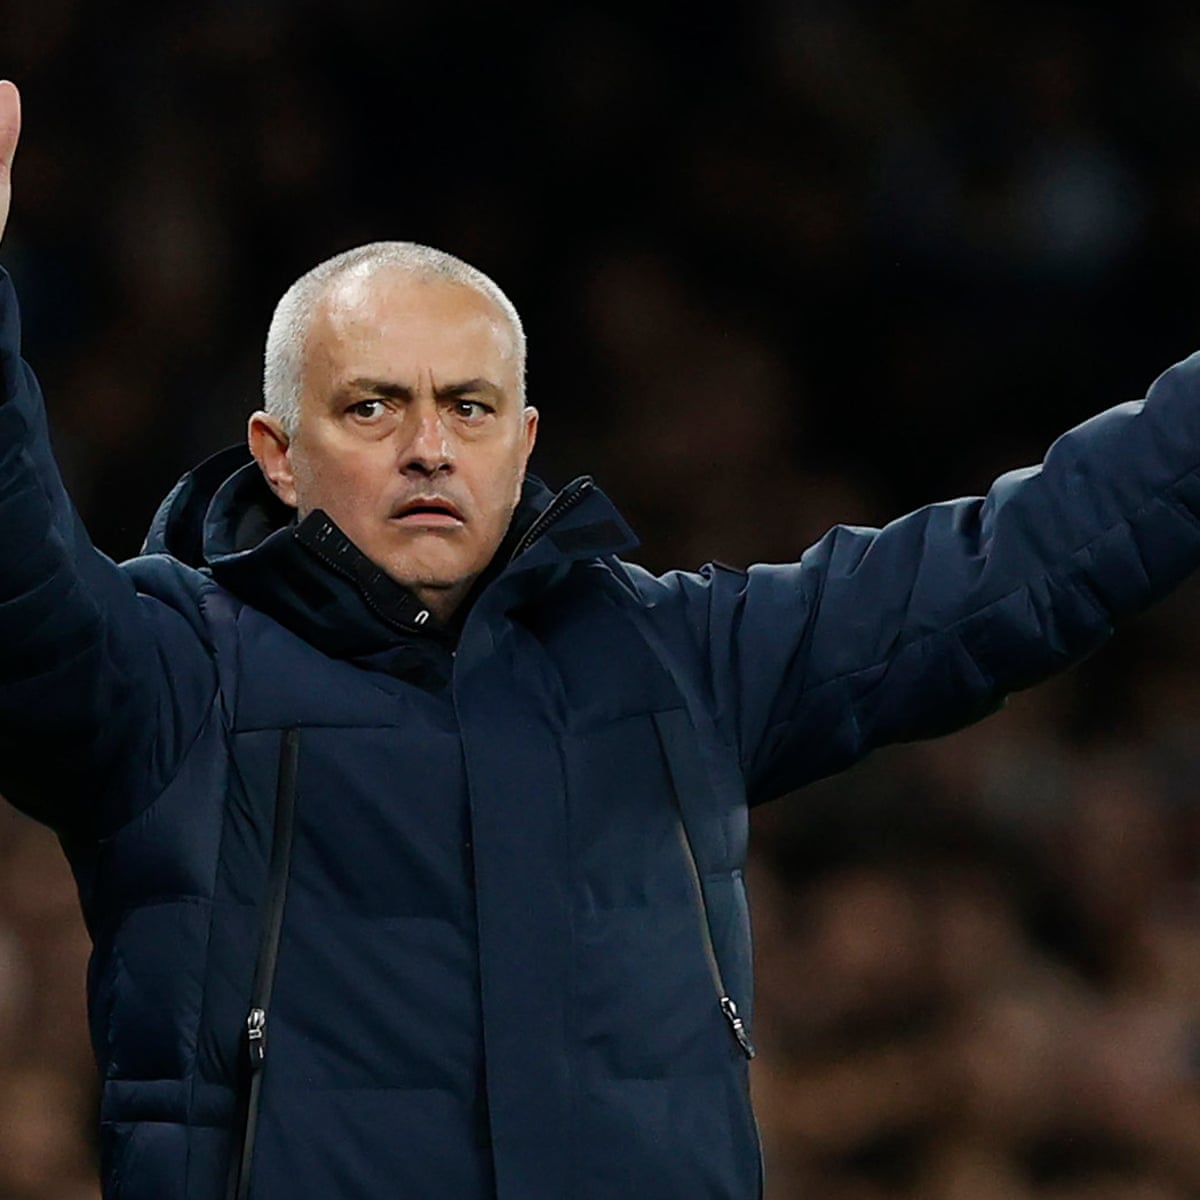 Four Tottenham teams Jose Mourinho could select to cope with